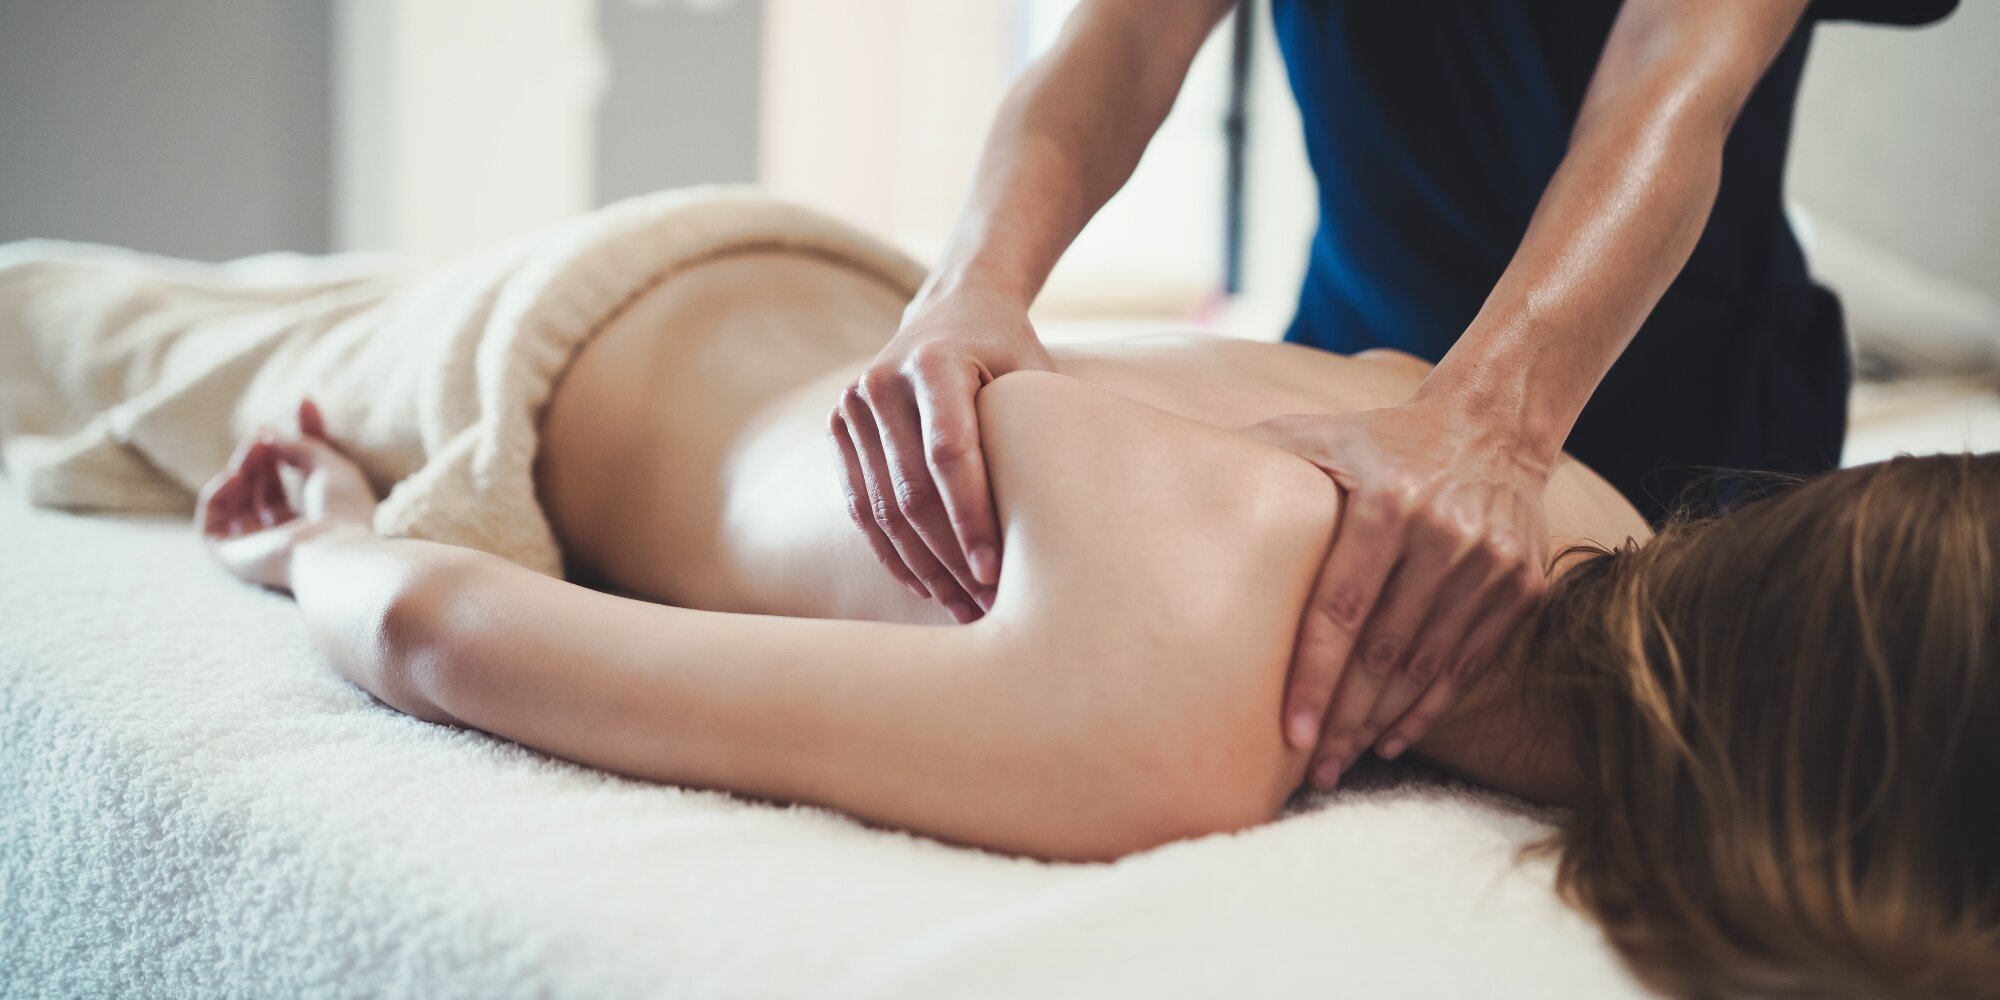 difference between a therapeutic massage and a classic massage